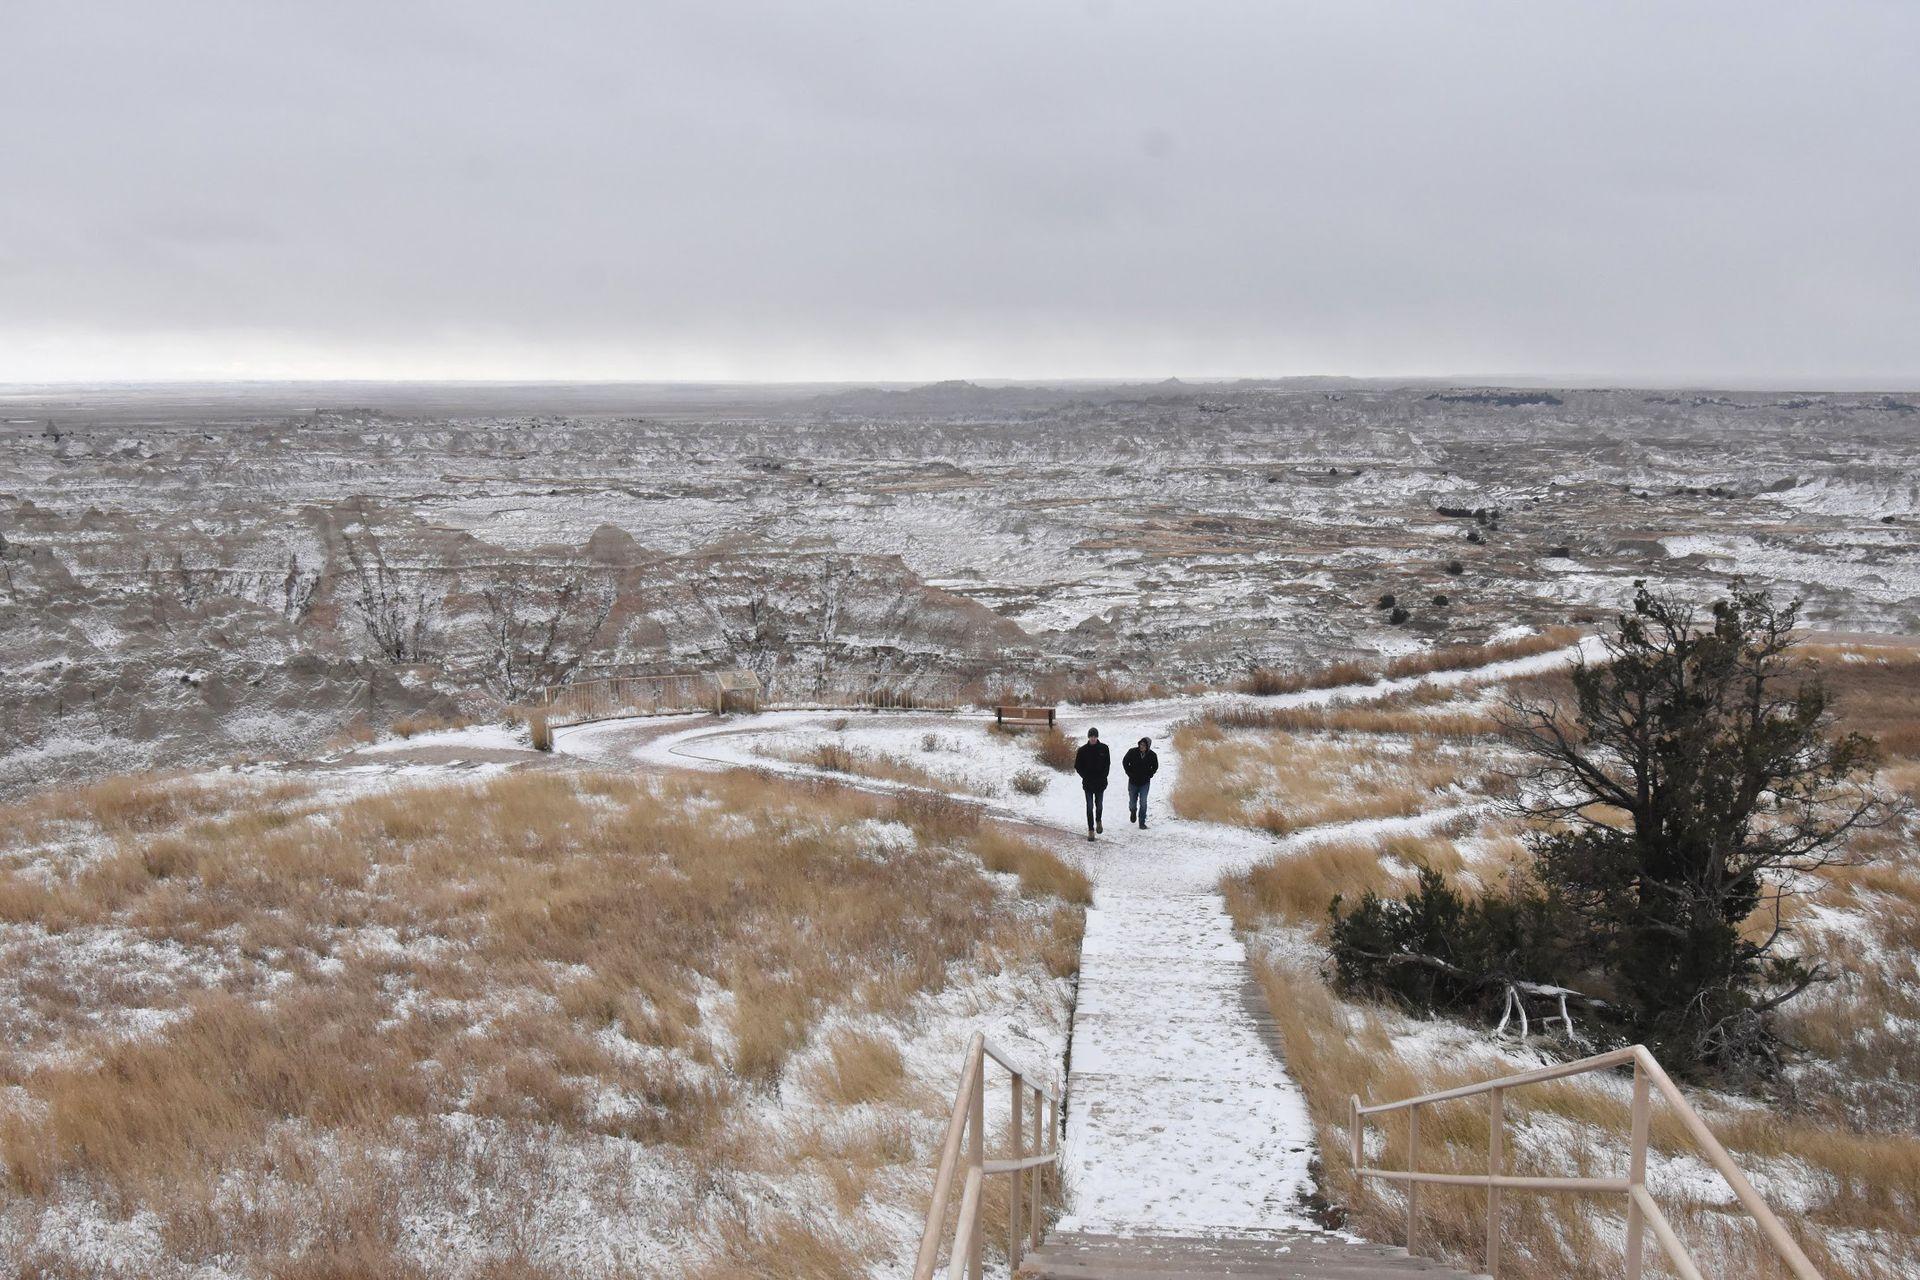 Two people walking on a snowy trail in the Badlands.